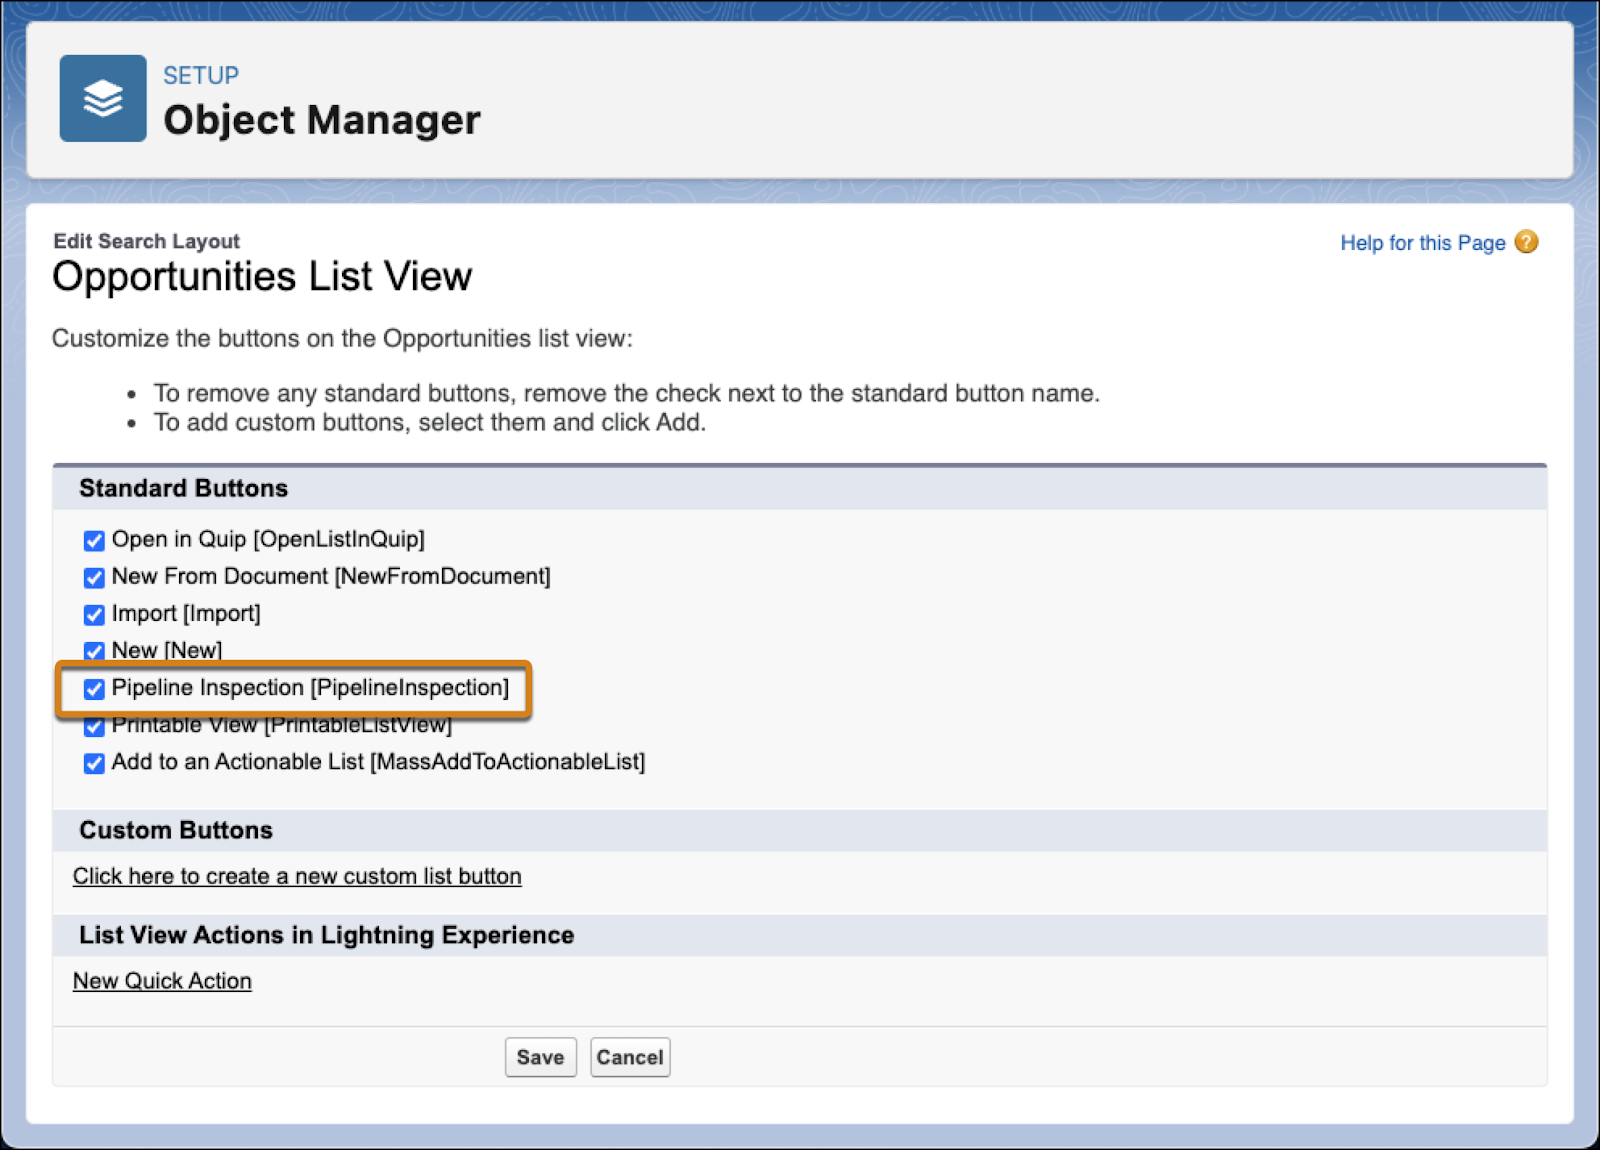 The Opportunity List View page with the Pipeline Inspection option ticked.